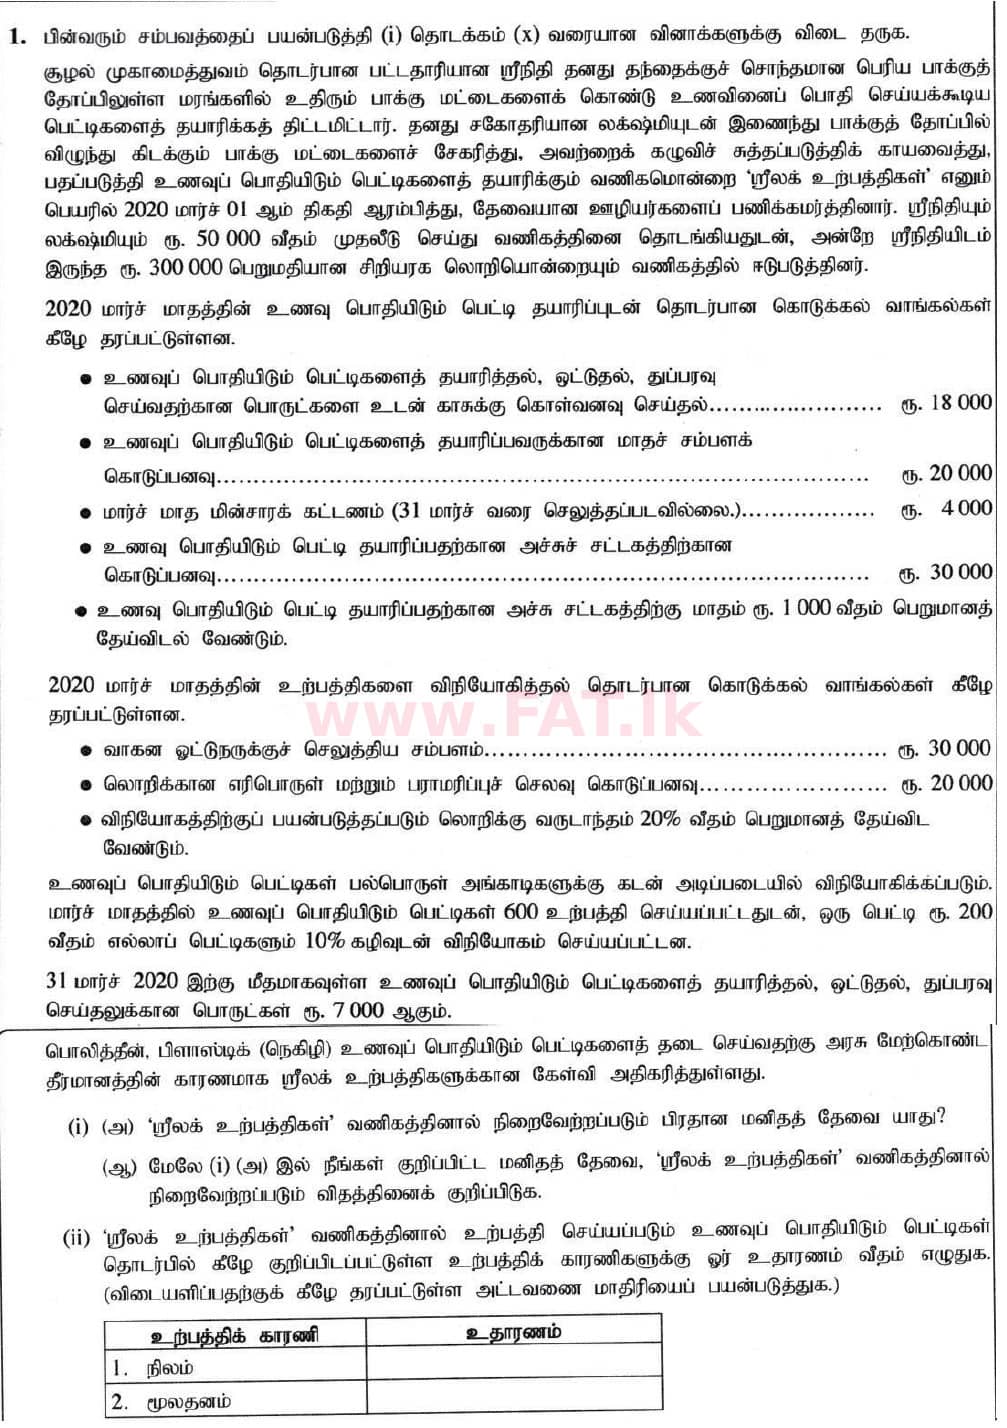 National Syllabus : Ordinary Level (O/L) Business and Accounting Studies - 2020 March - Paper II (தமிழ் Medium) 1 1